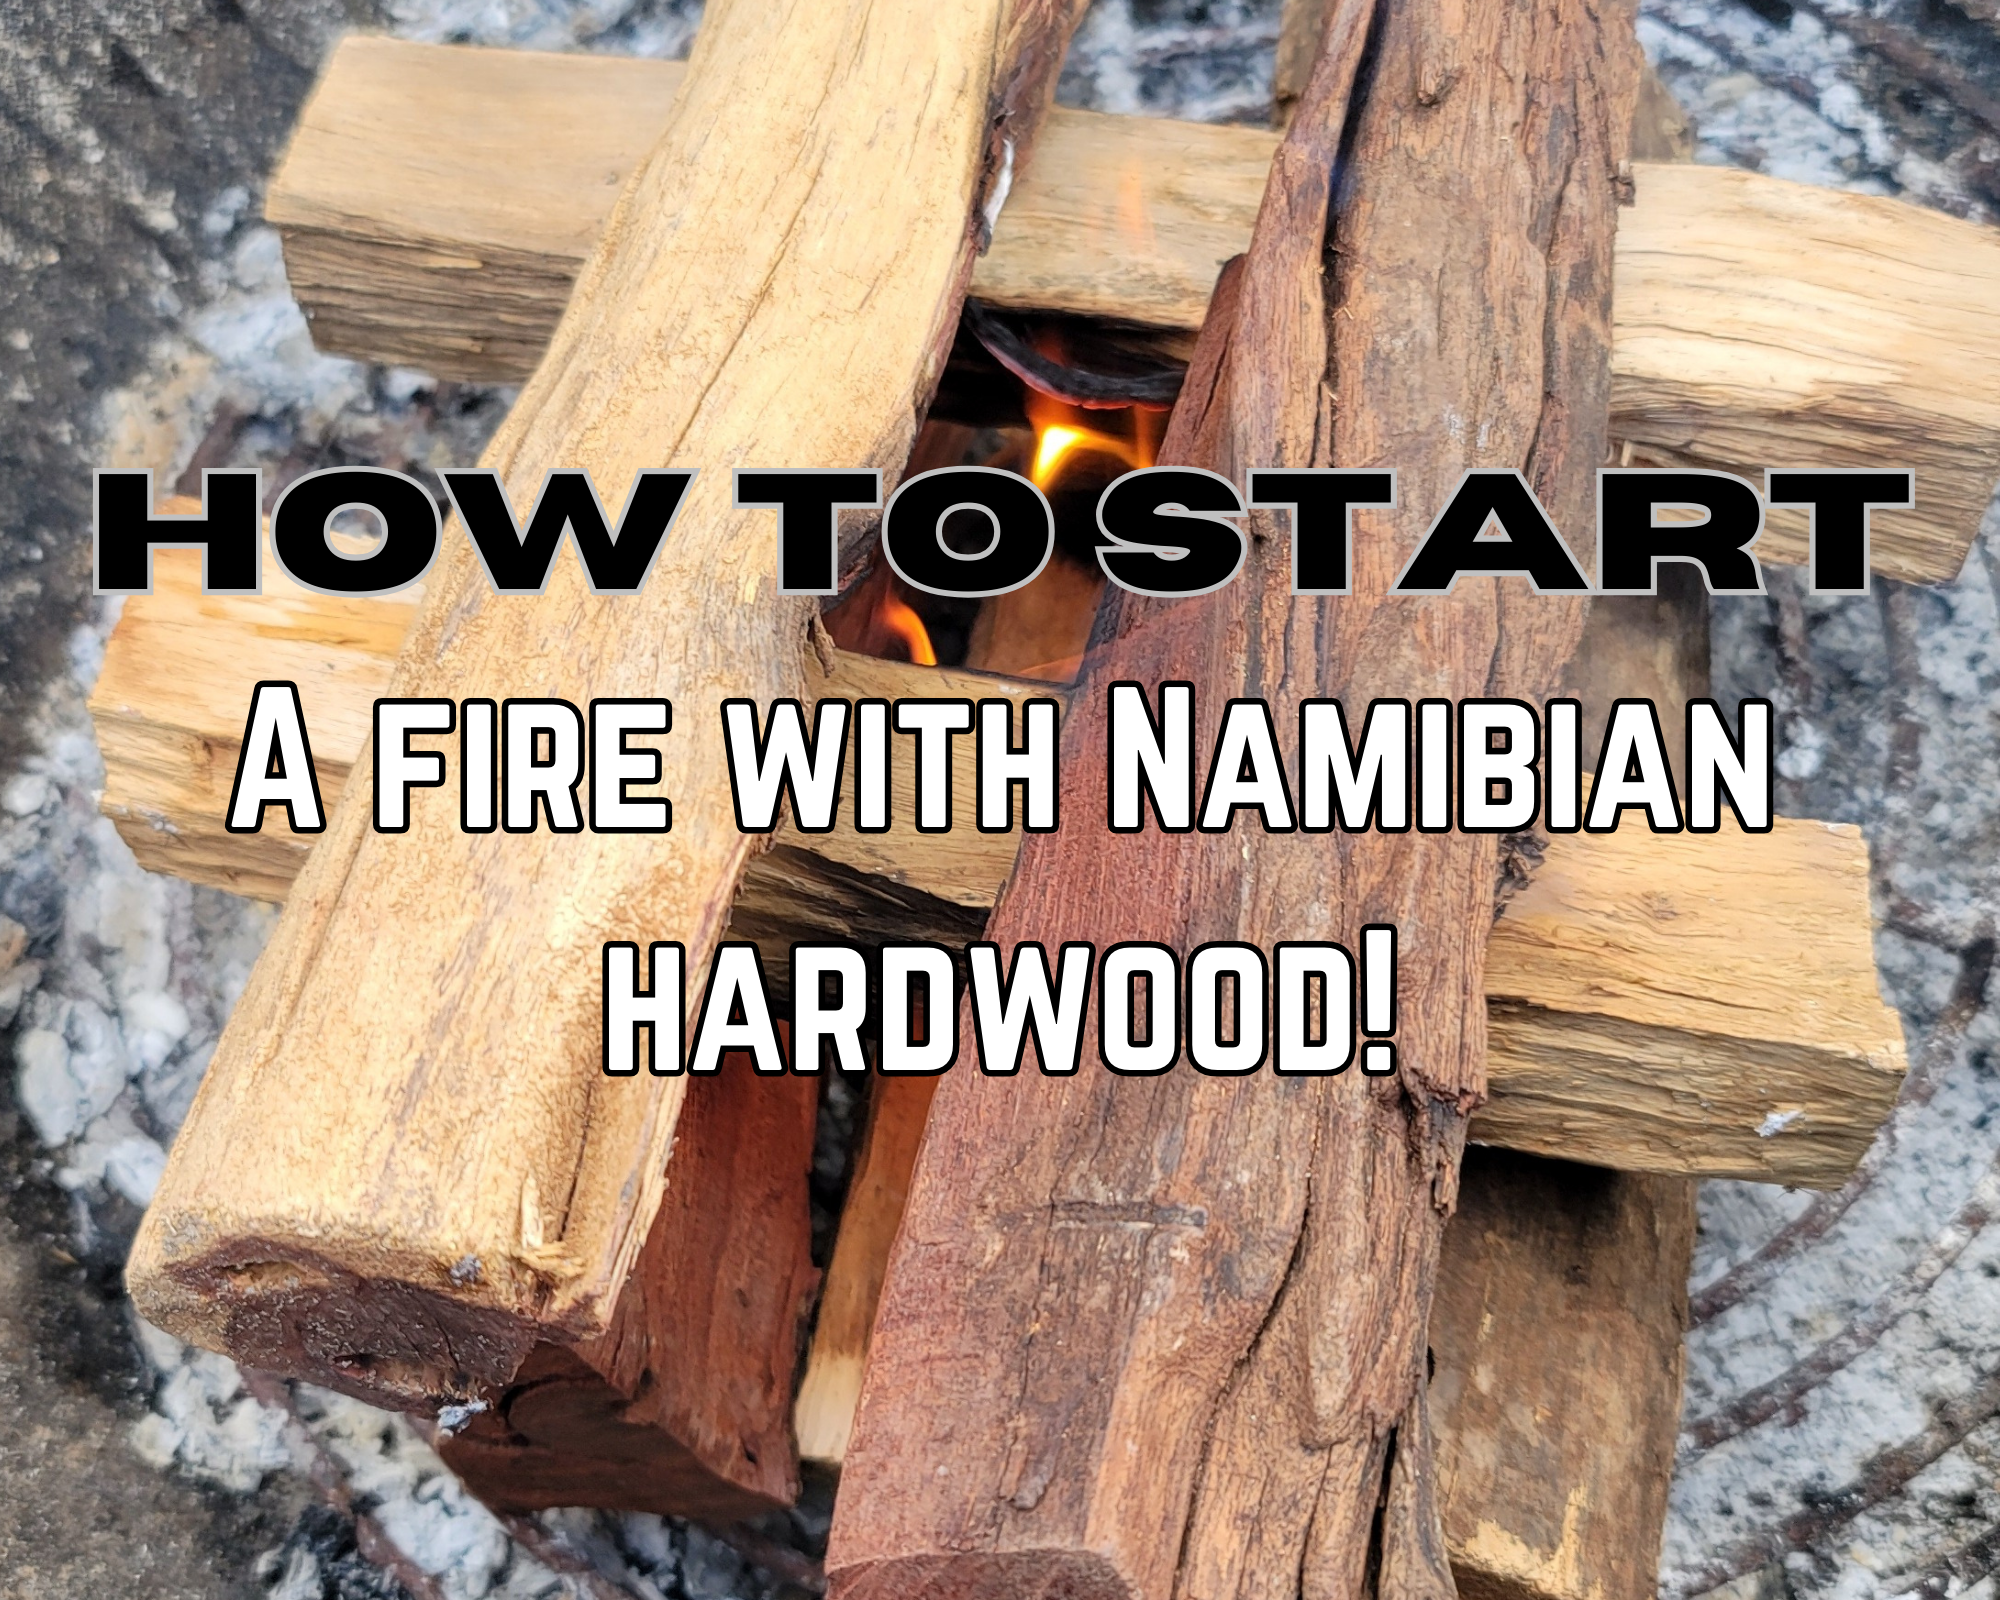 Load video: Instructions on how to start a fire using Namibian hardwood